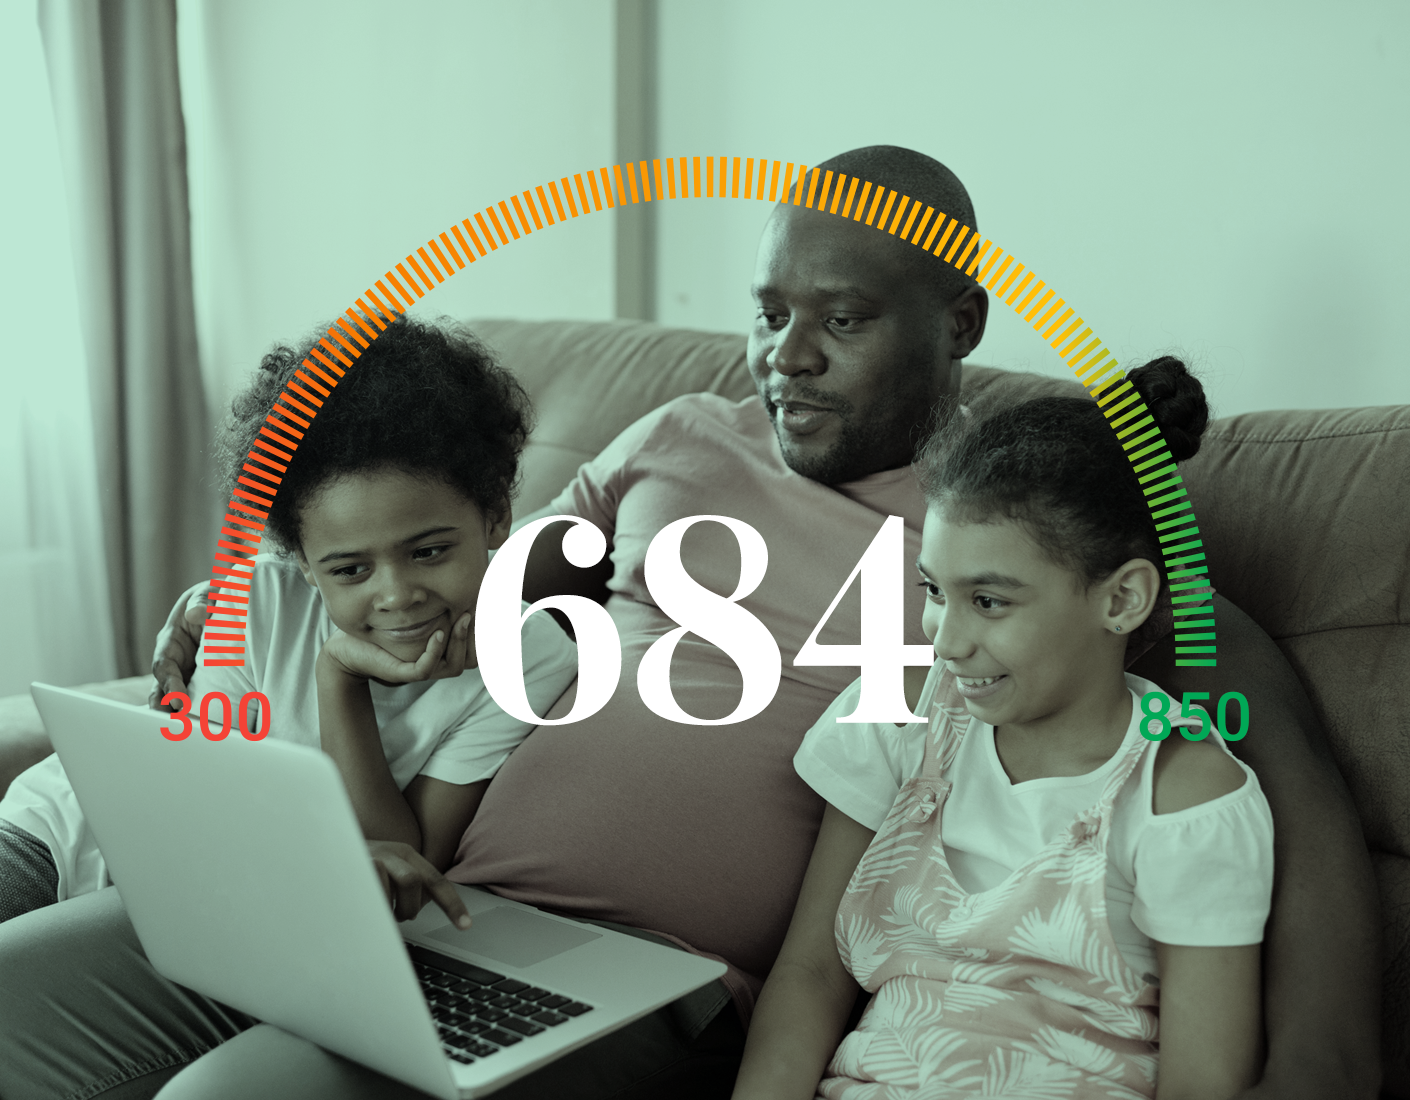 684 credit score in front of family watching on a laptop